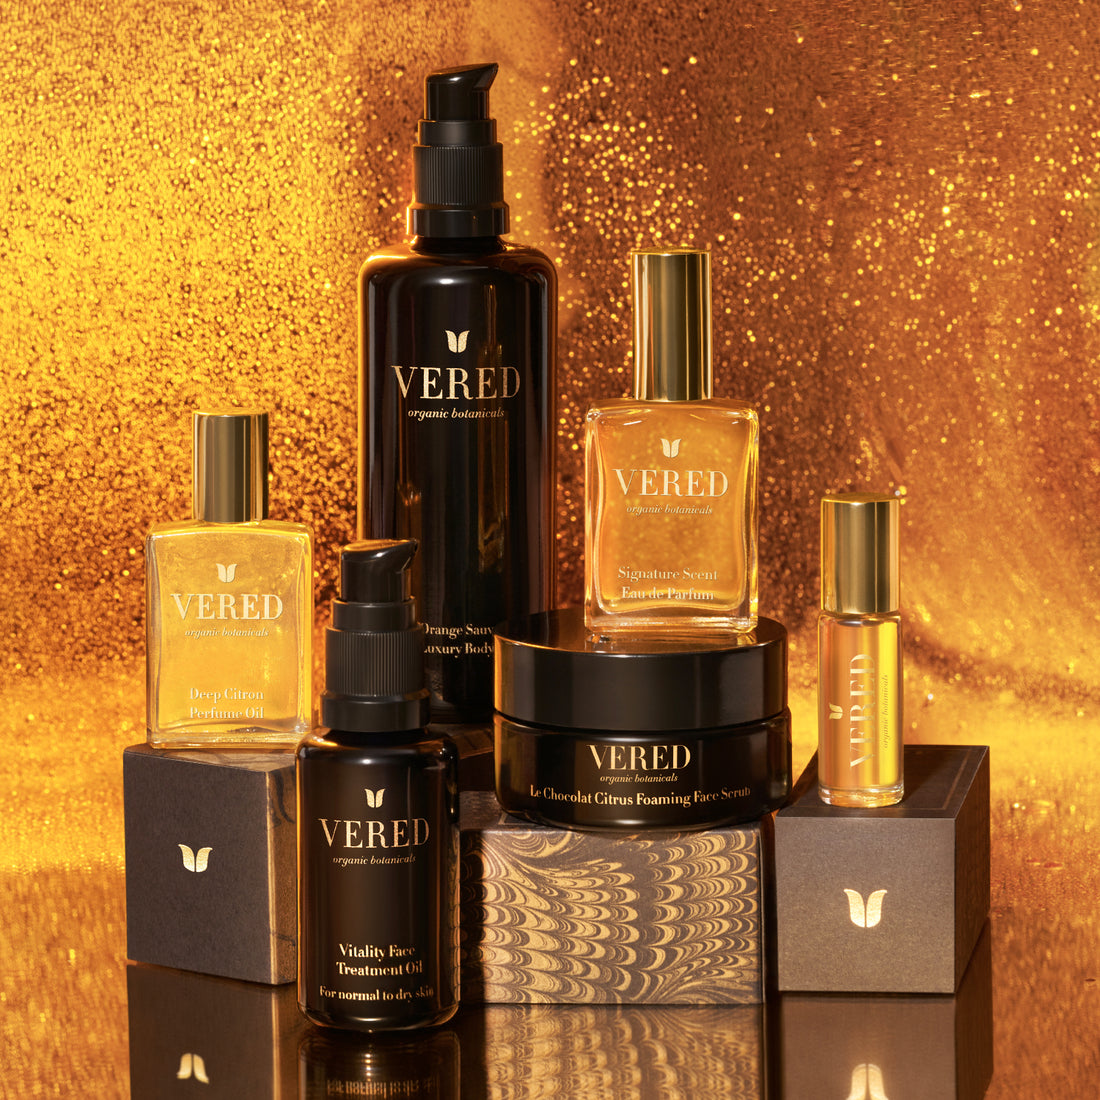 Give a warm welcome to Vered Organic Botanicals